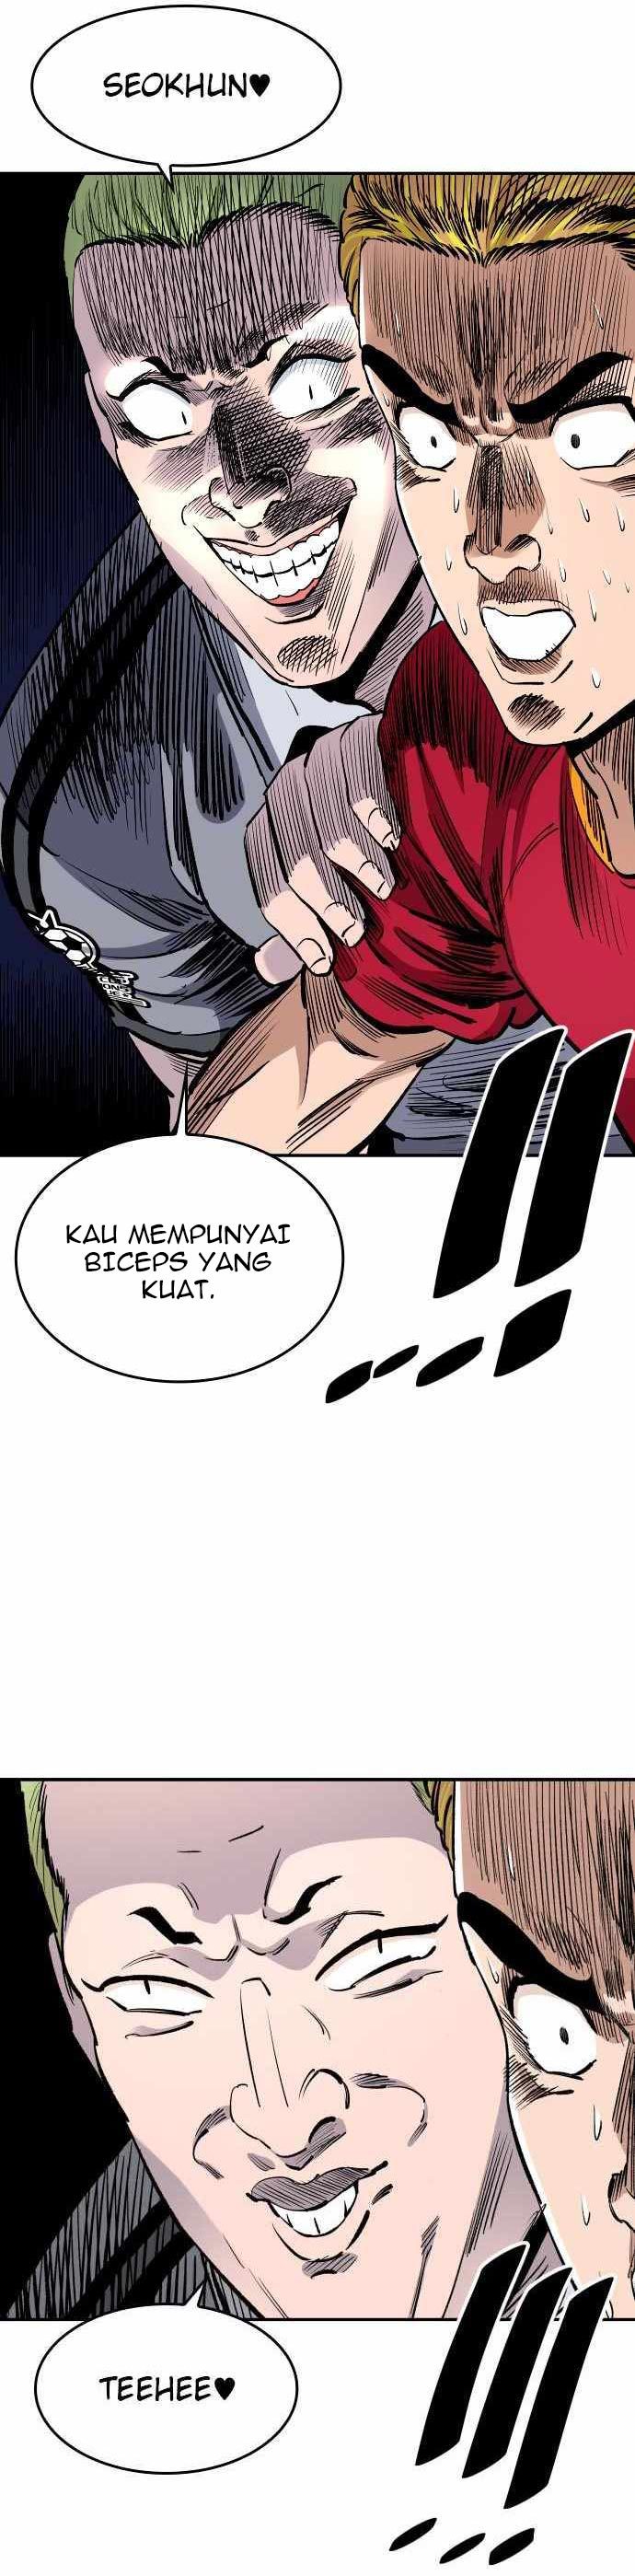 Build Up Chapter 76